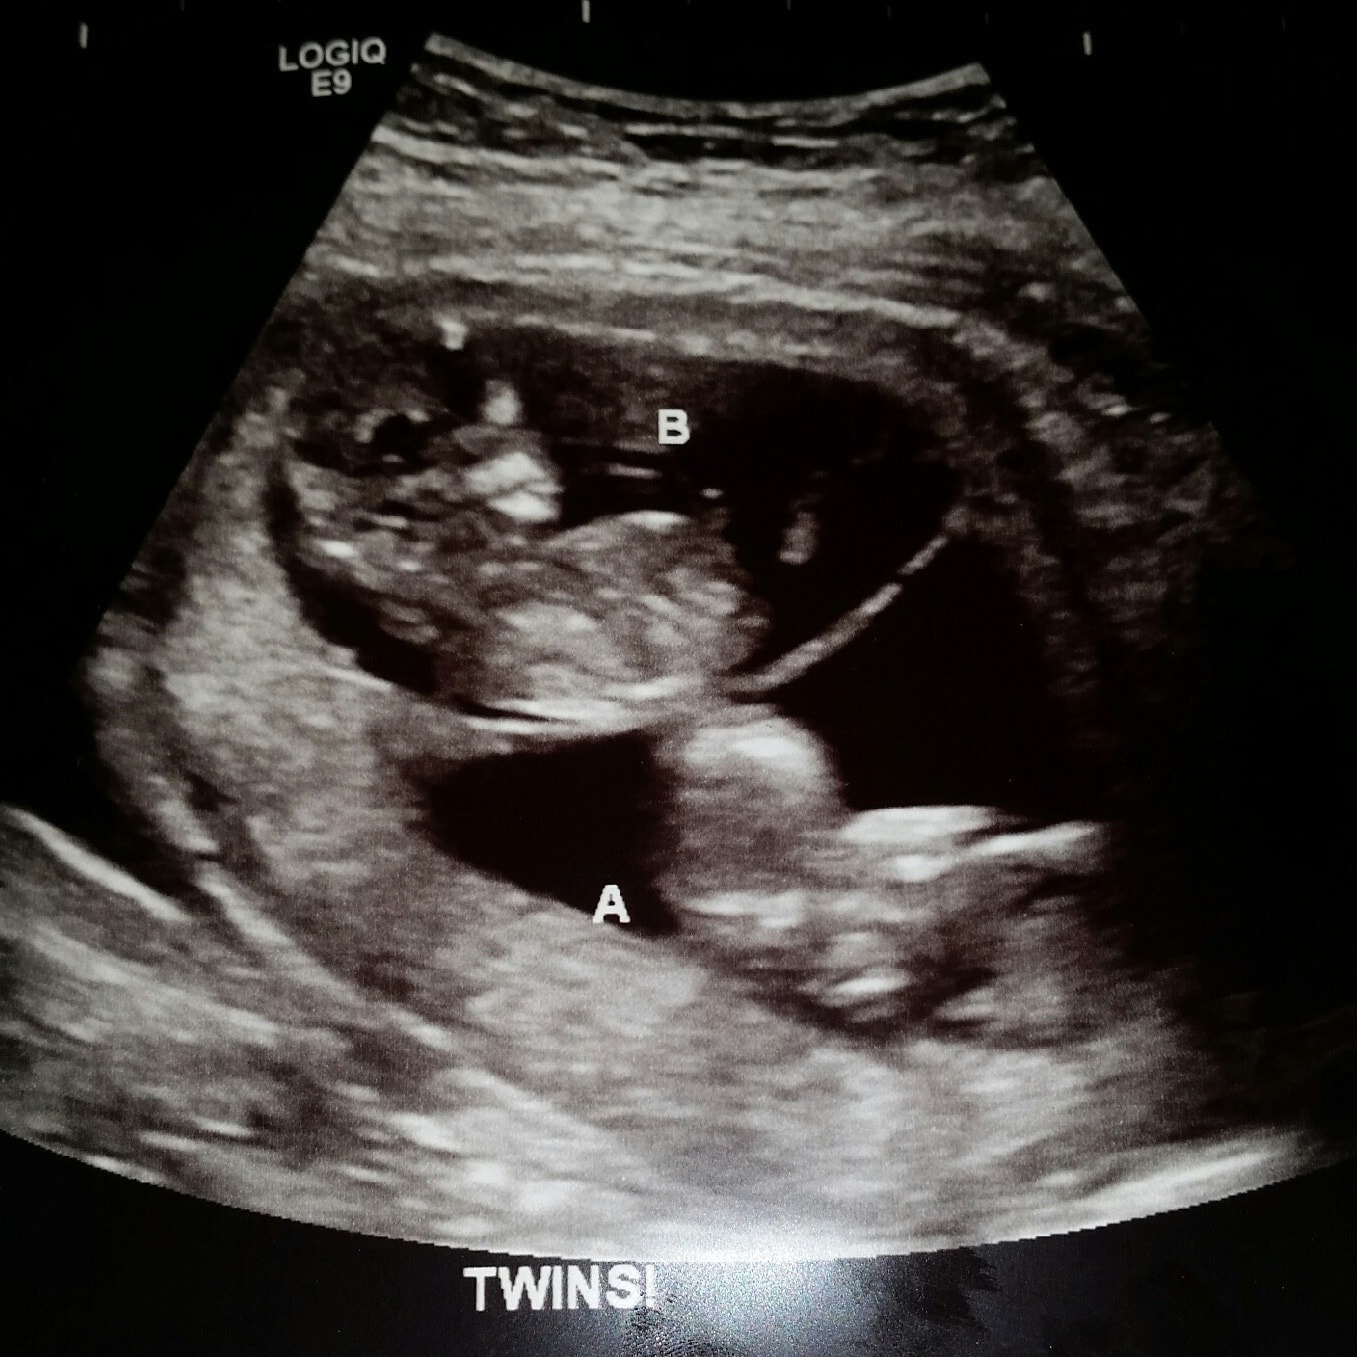 12 Weeks Pregnant with Twins